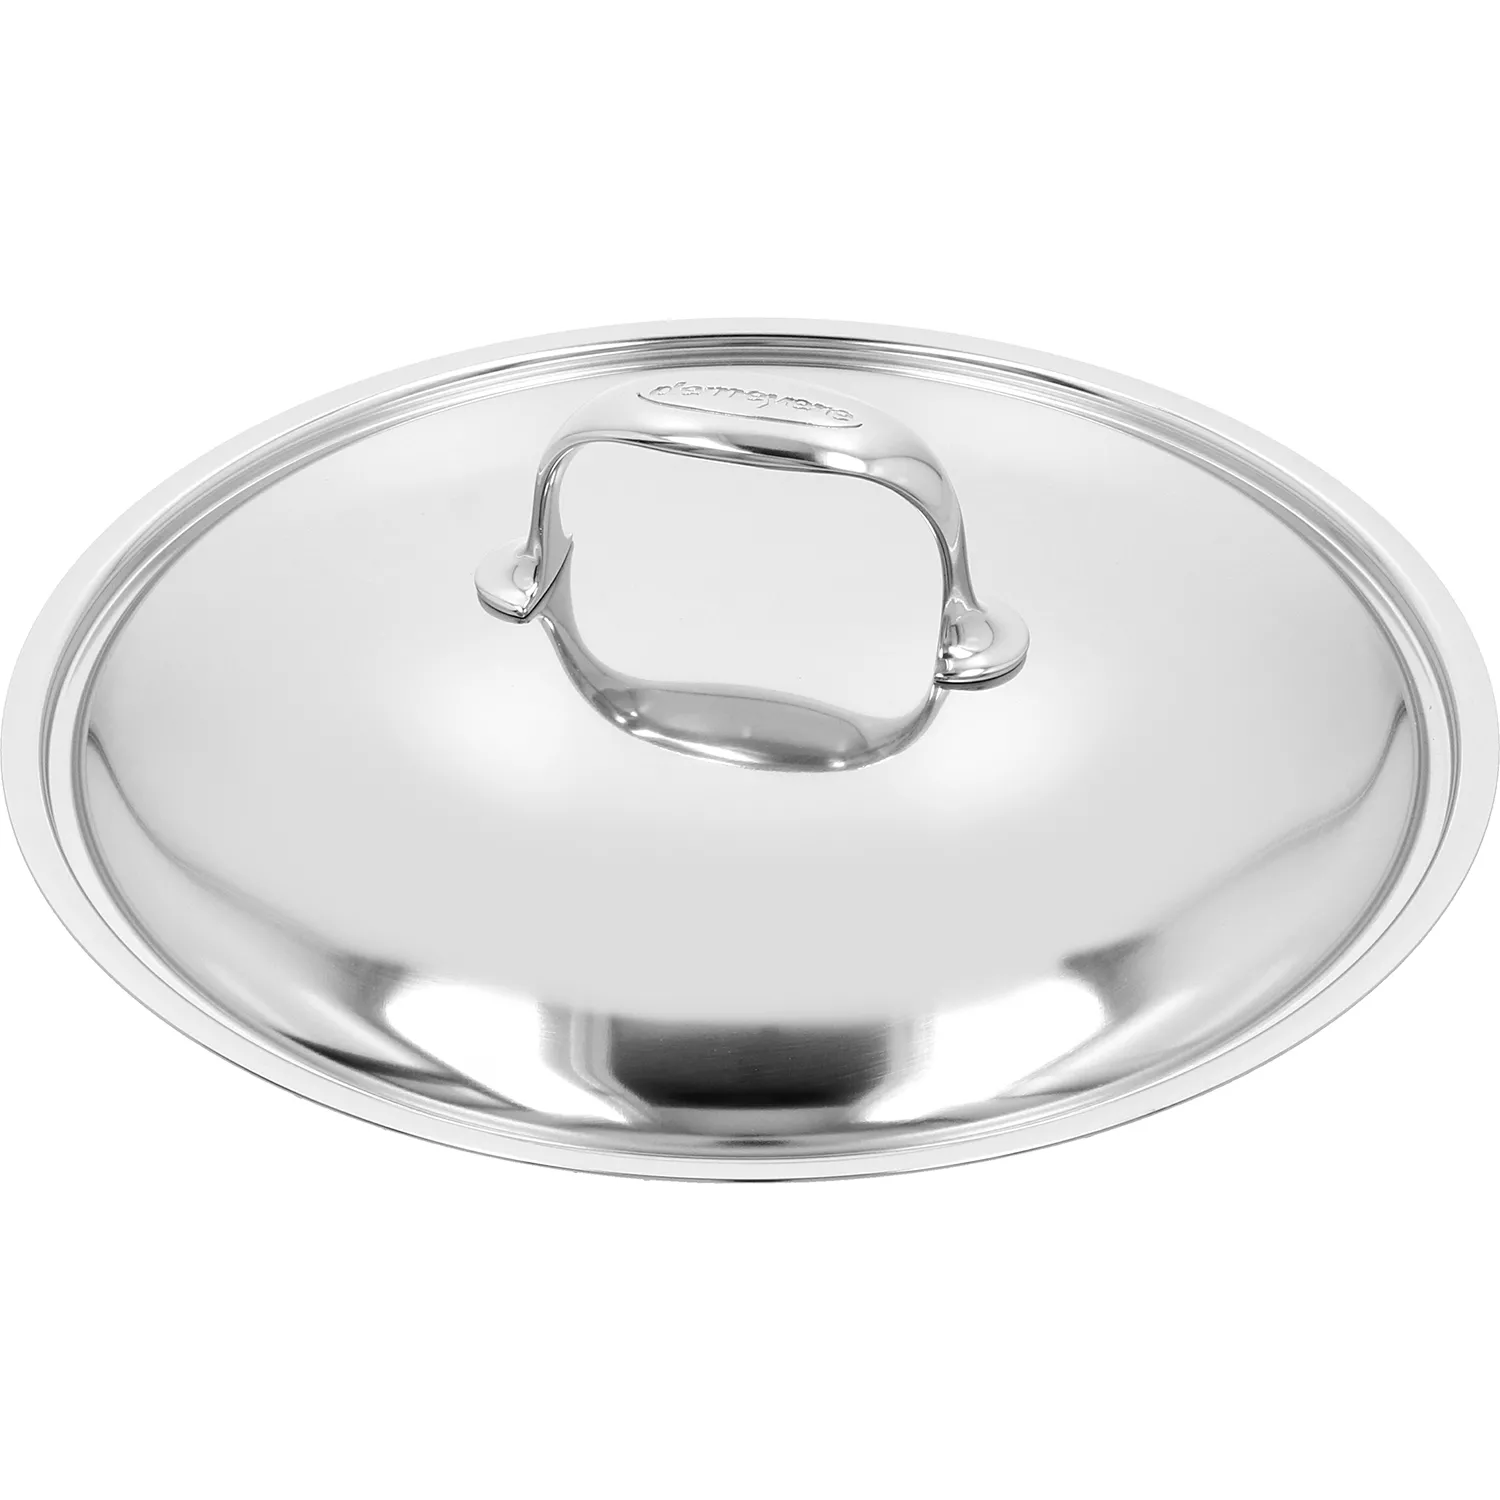 Demeyere Atlantis7 Stainless Steel Sauté Pan with Helper Handle and Lid